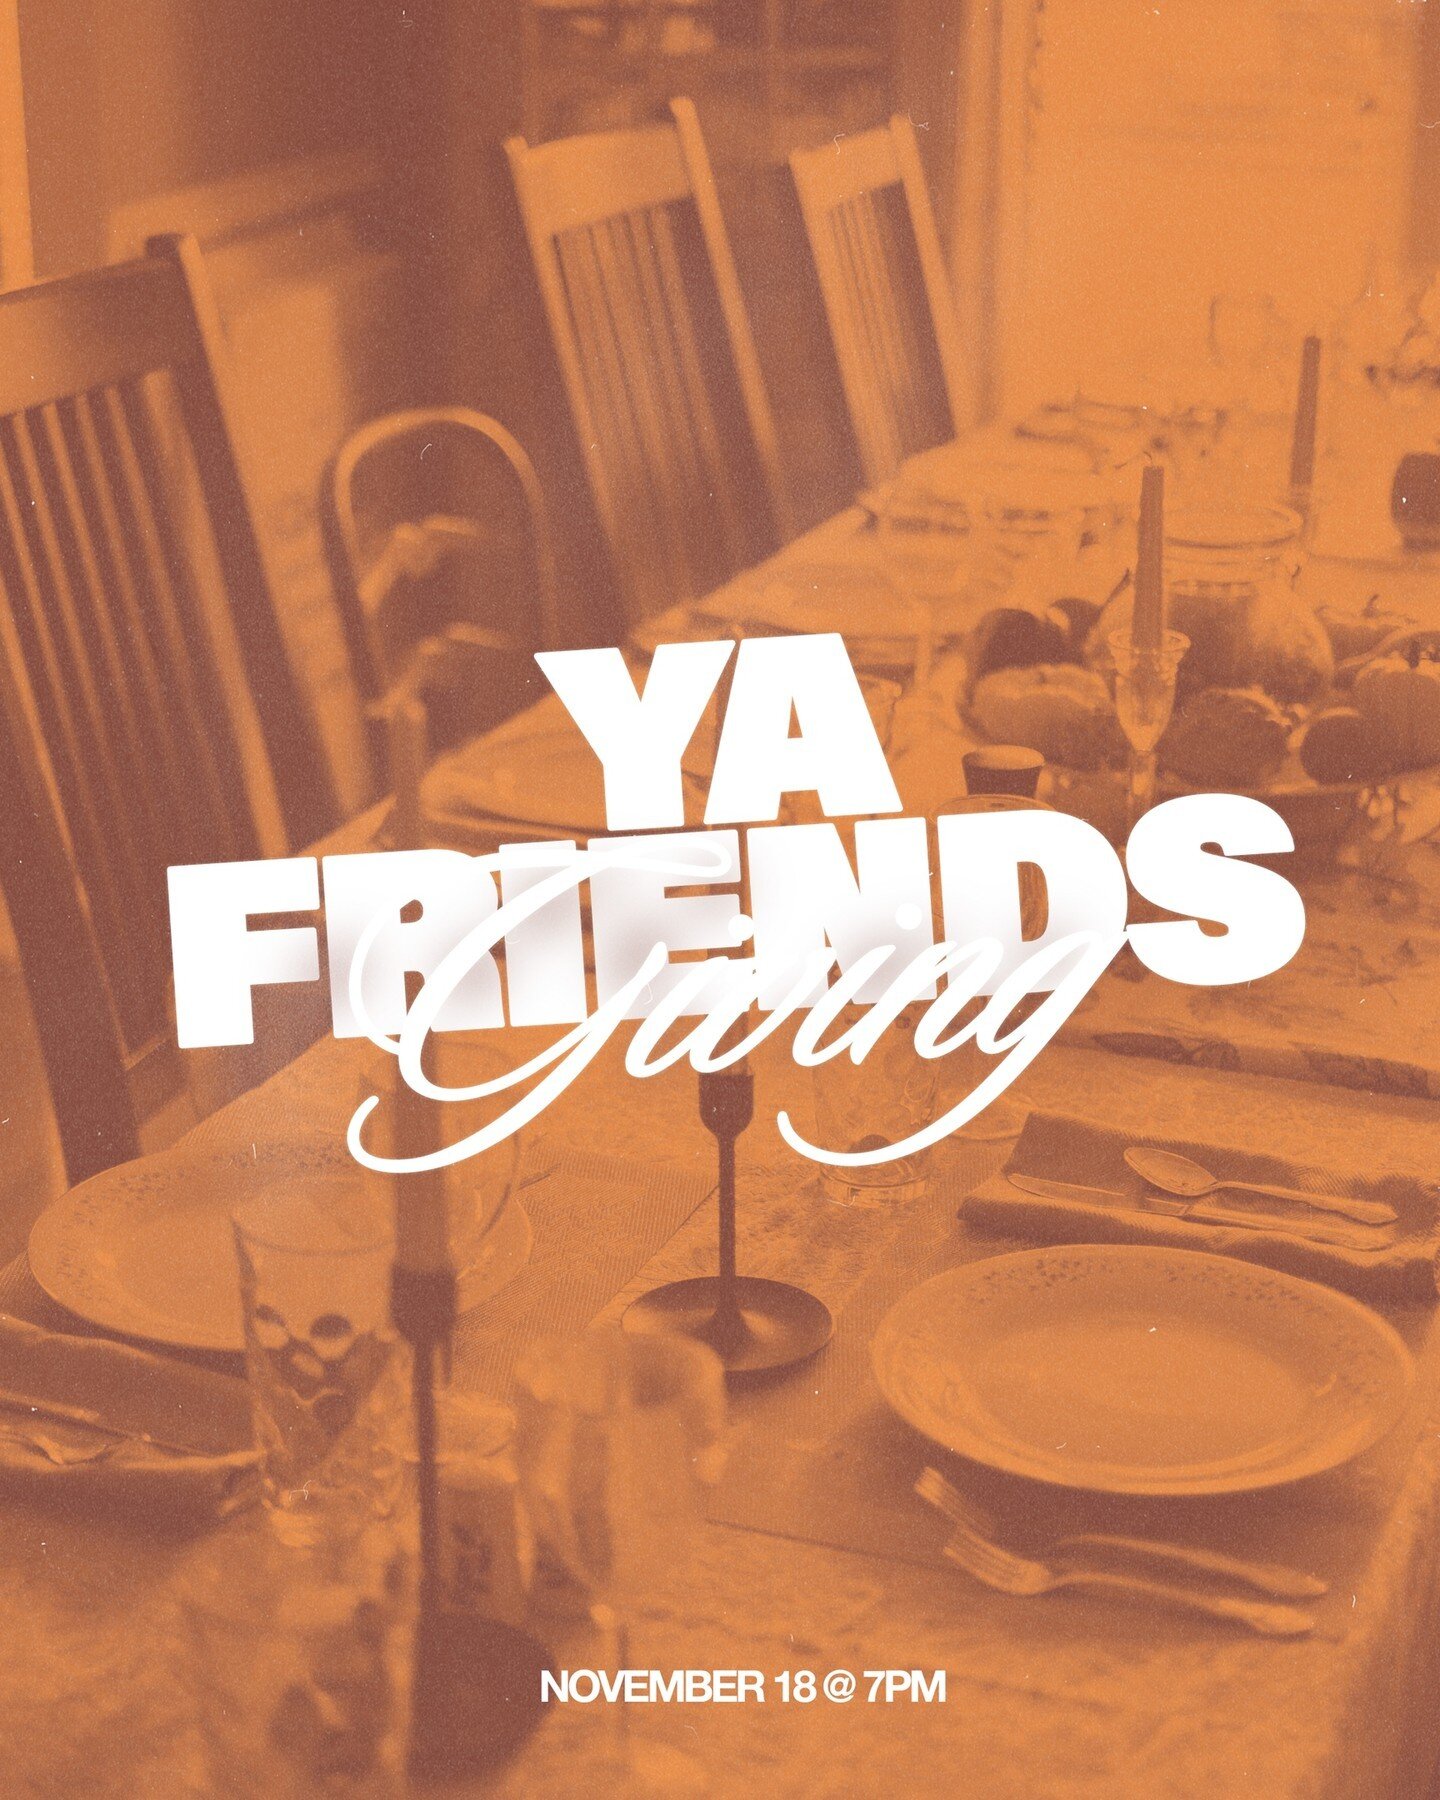 If you're 18 - 30s, come hang out with your Christ Alive YA fam and enjoy a delicious &amp; classic Thanksgiving dinner! Invite your friends to come with you! ⁠
⁠
Click the link in our bio to RSVP: https://cac.ccbchurch.com/goto/forms/526/responses/n